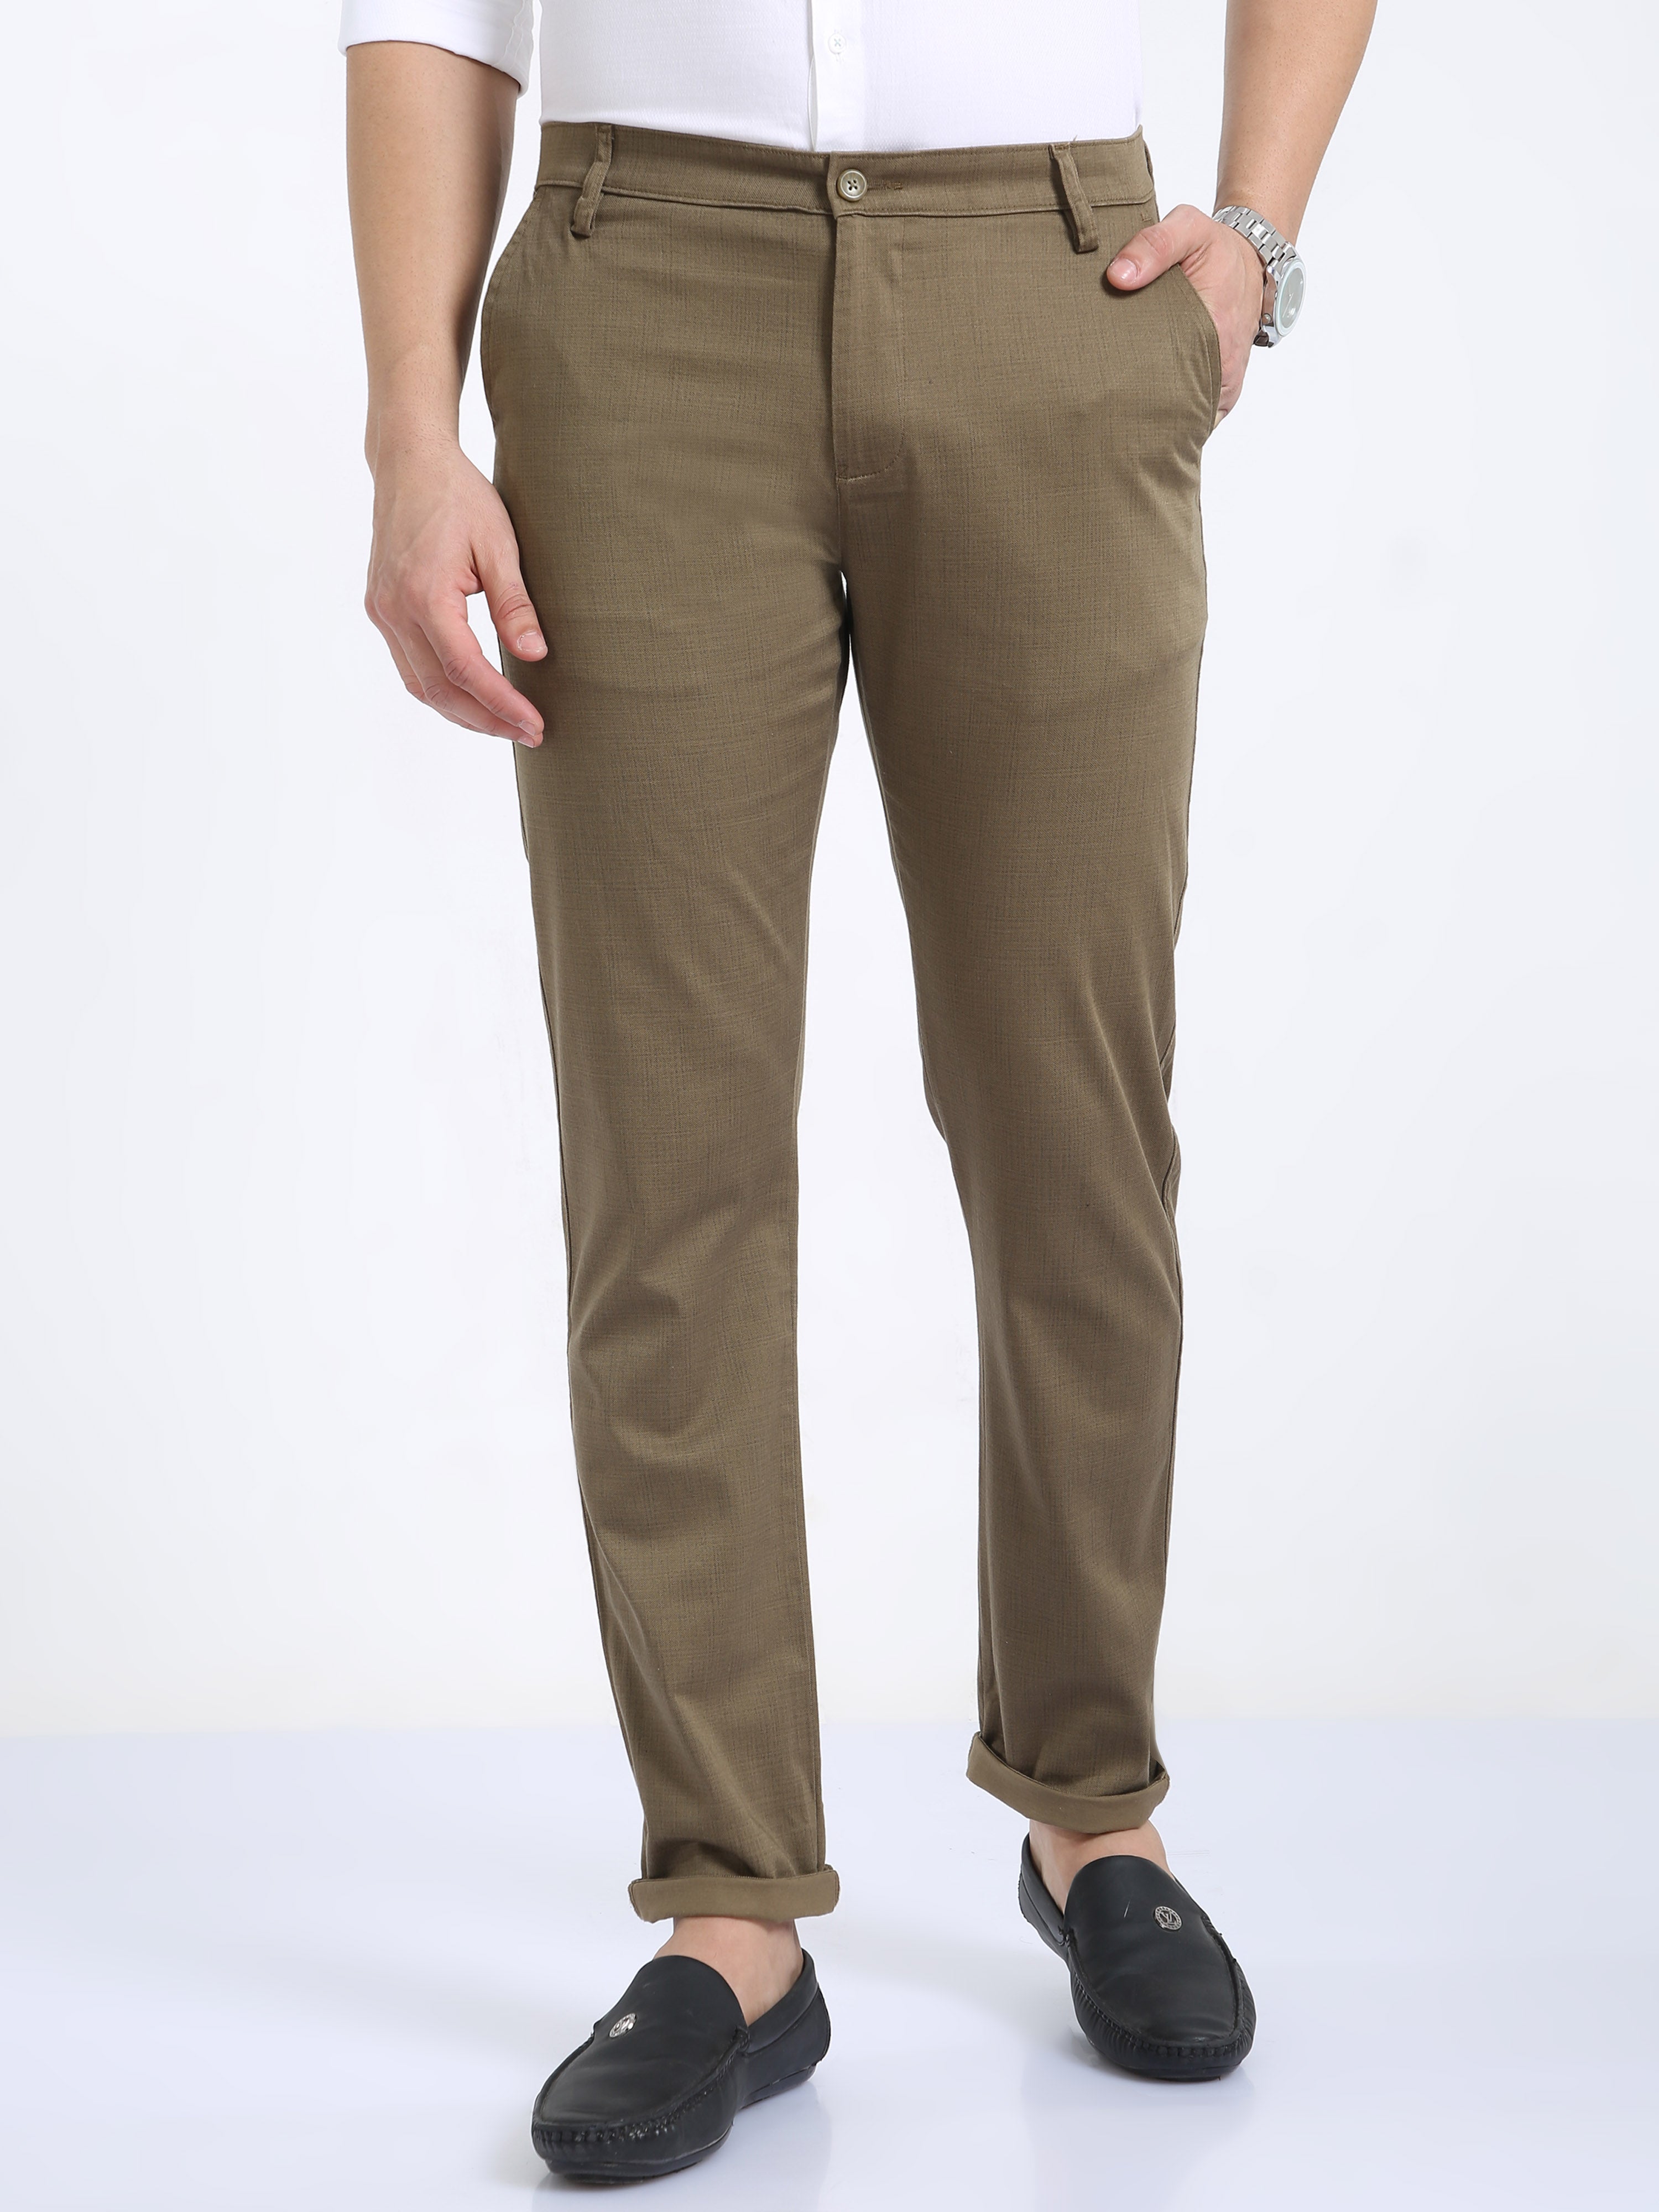 CP BRO Mens Moderate Fit Solid Dark Khakhi Color Trousers | To2-09 C-Pis-Mf-Ly